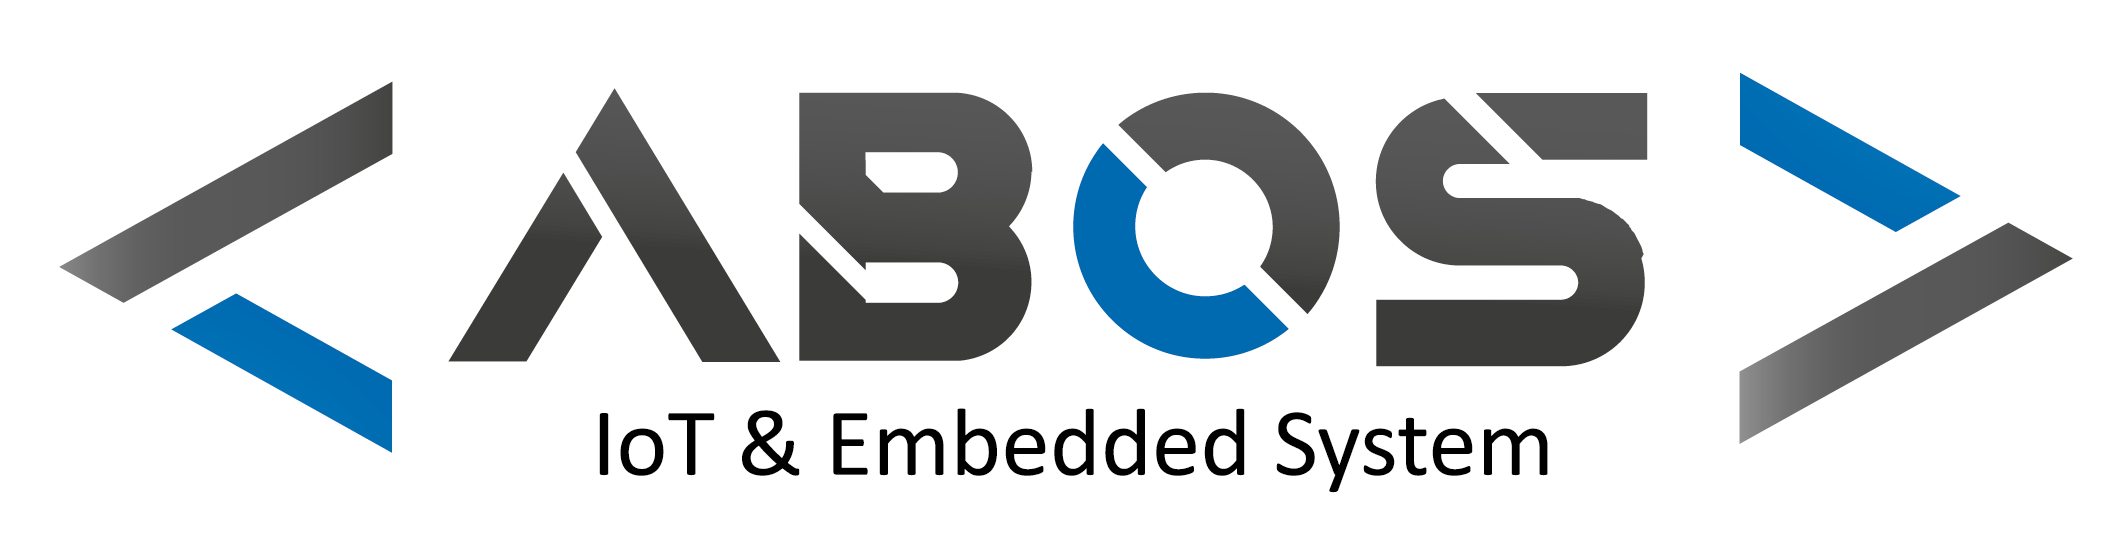 ABOS Technology 